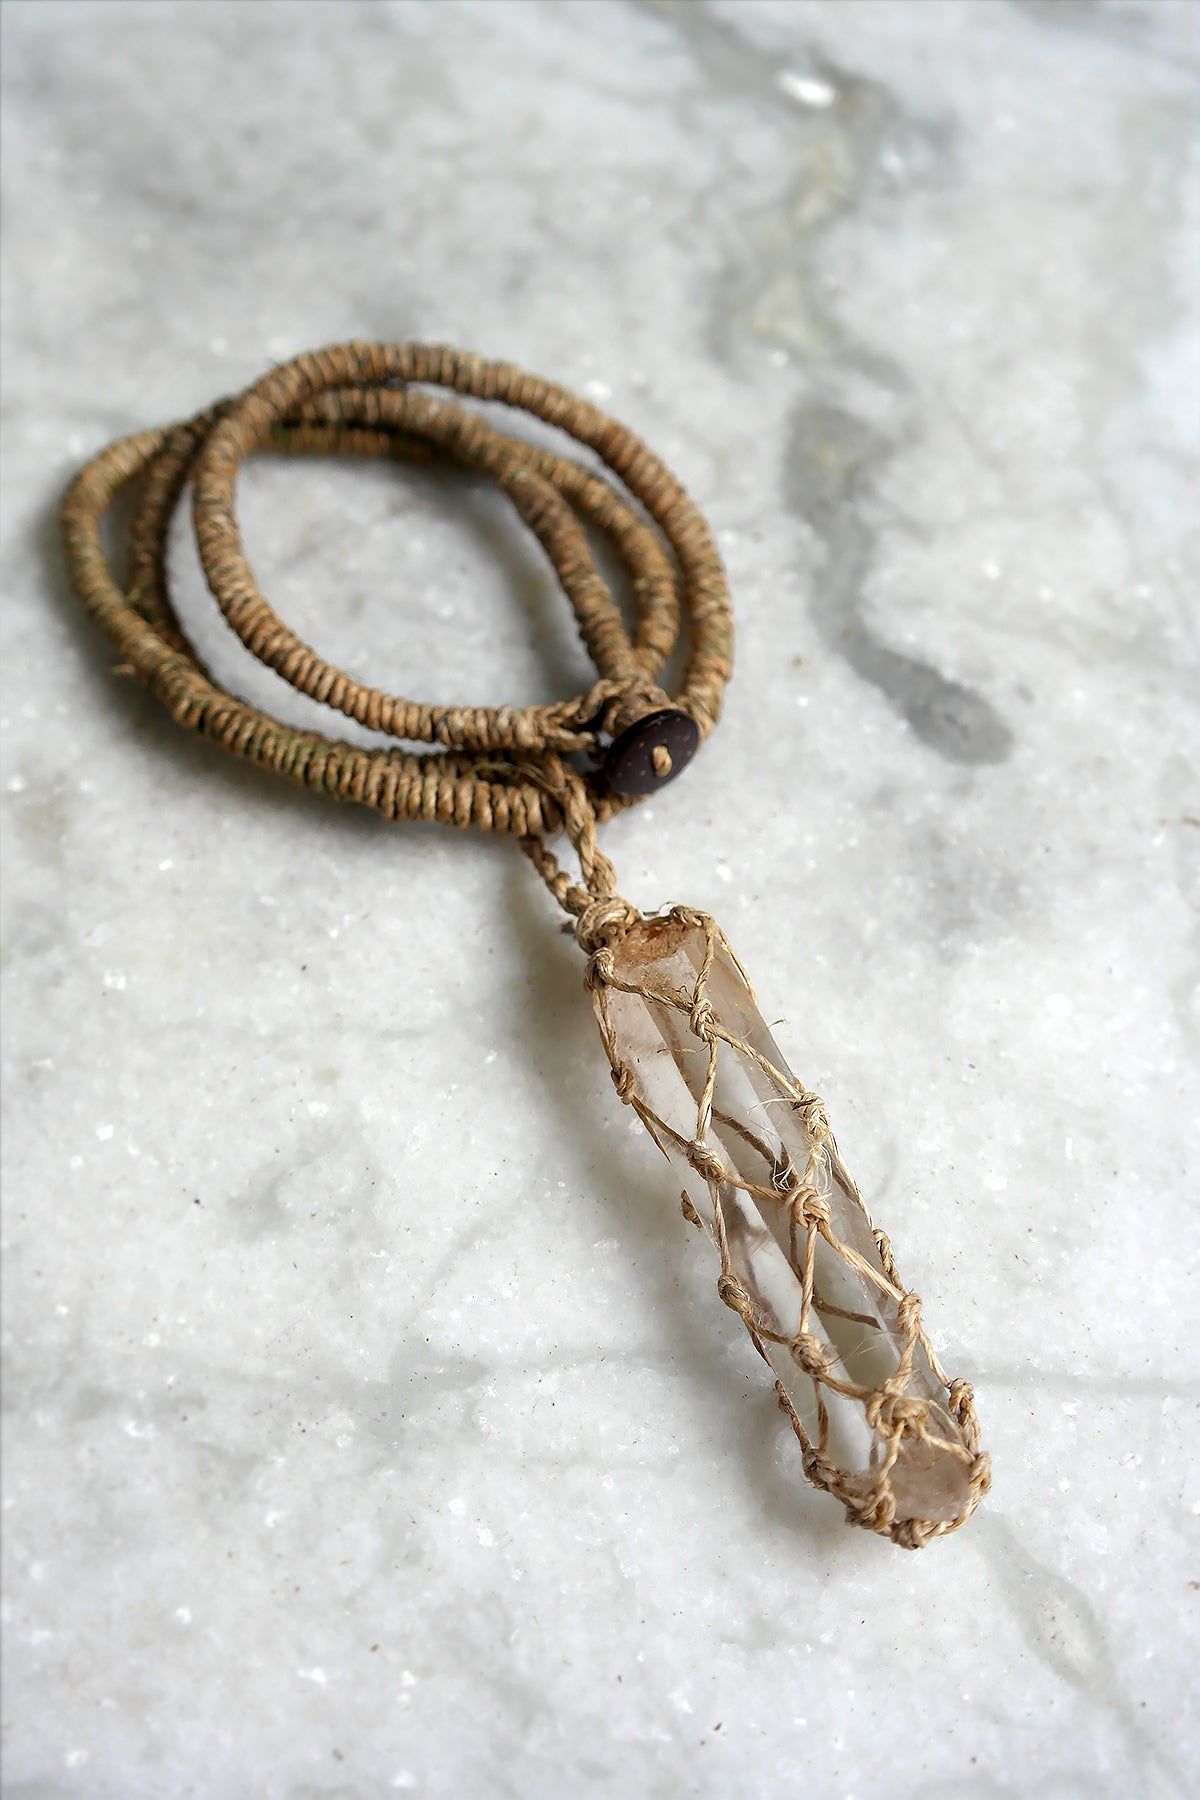 Hemp Cord Necklace Stone / Crystal Holder - 2 sizes to choose from